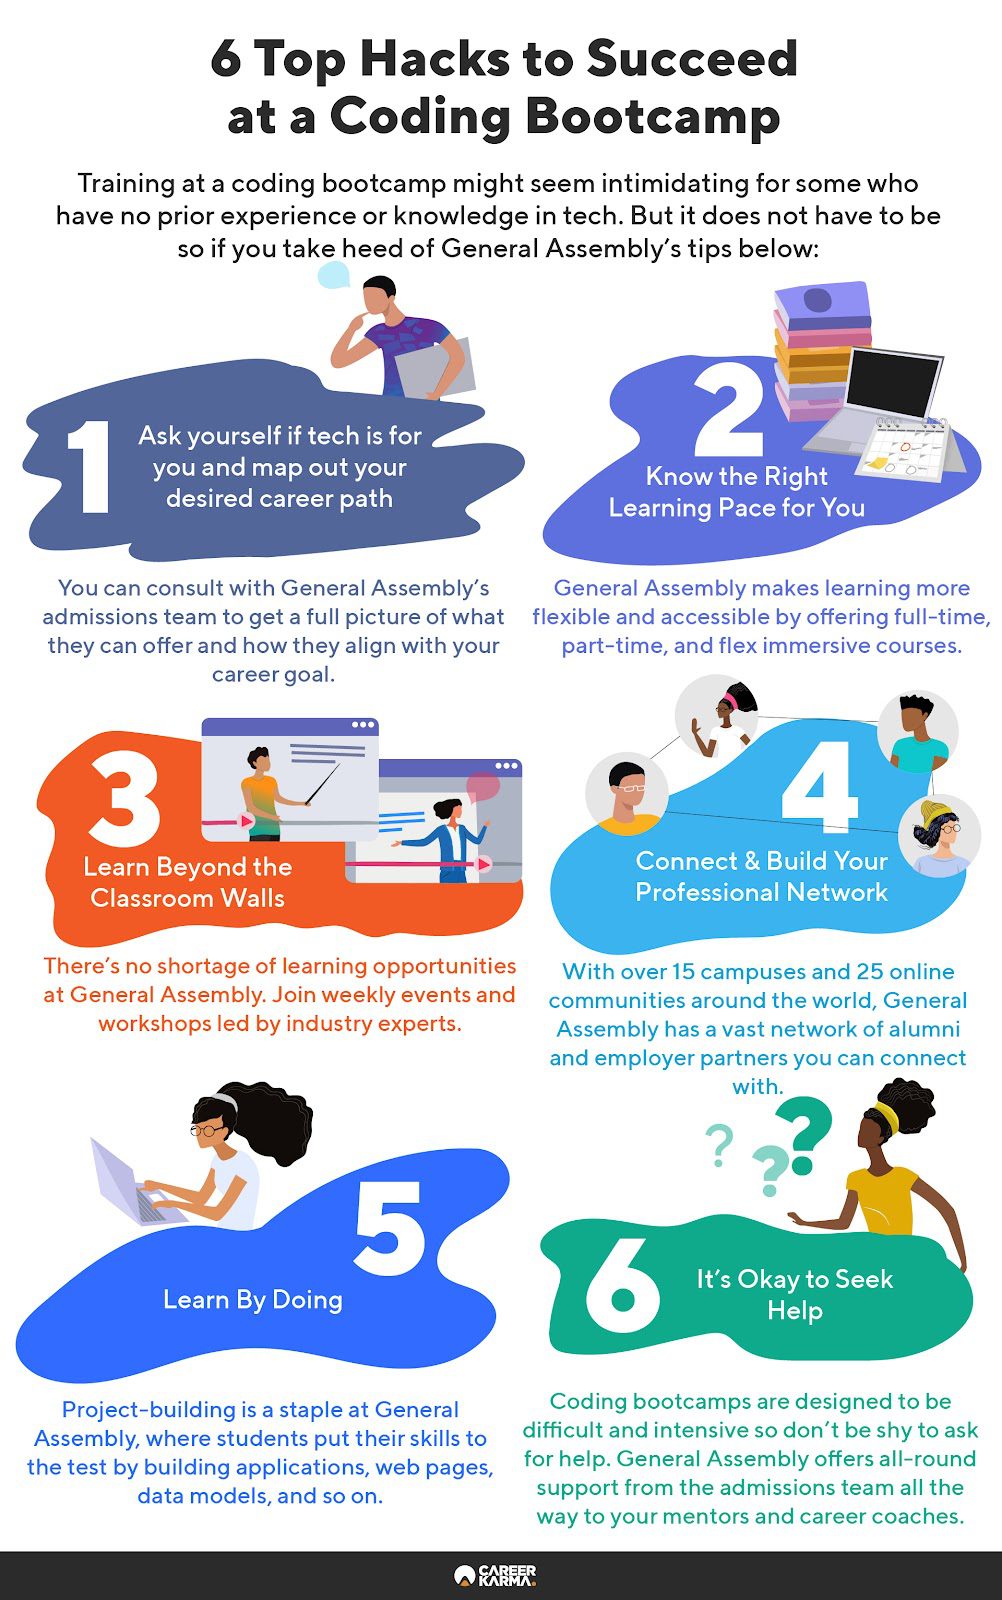 An infographic listing tips on how you can succeed at a coding bootcamp